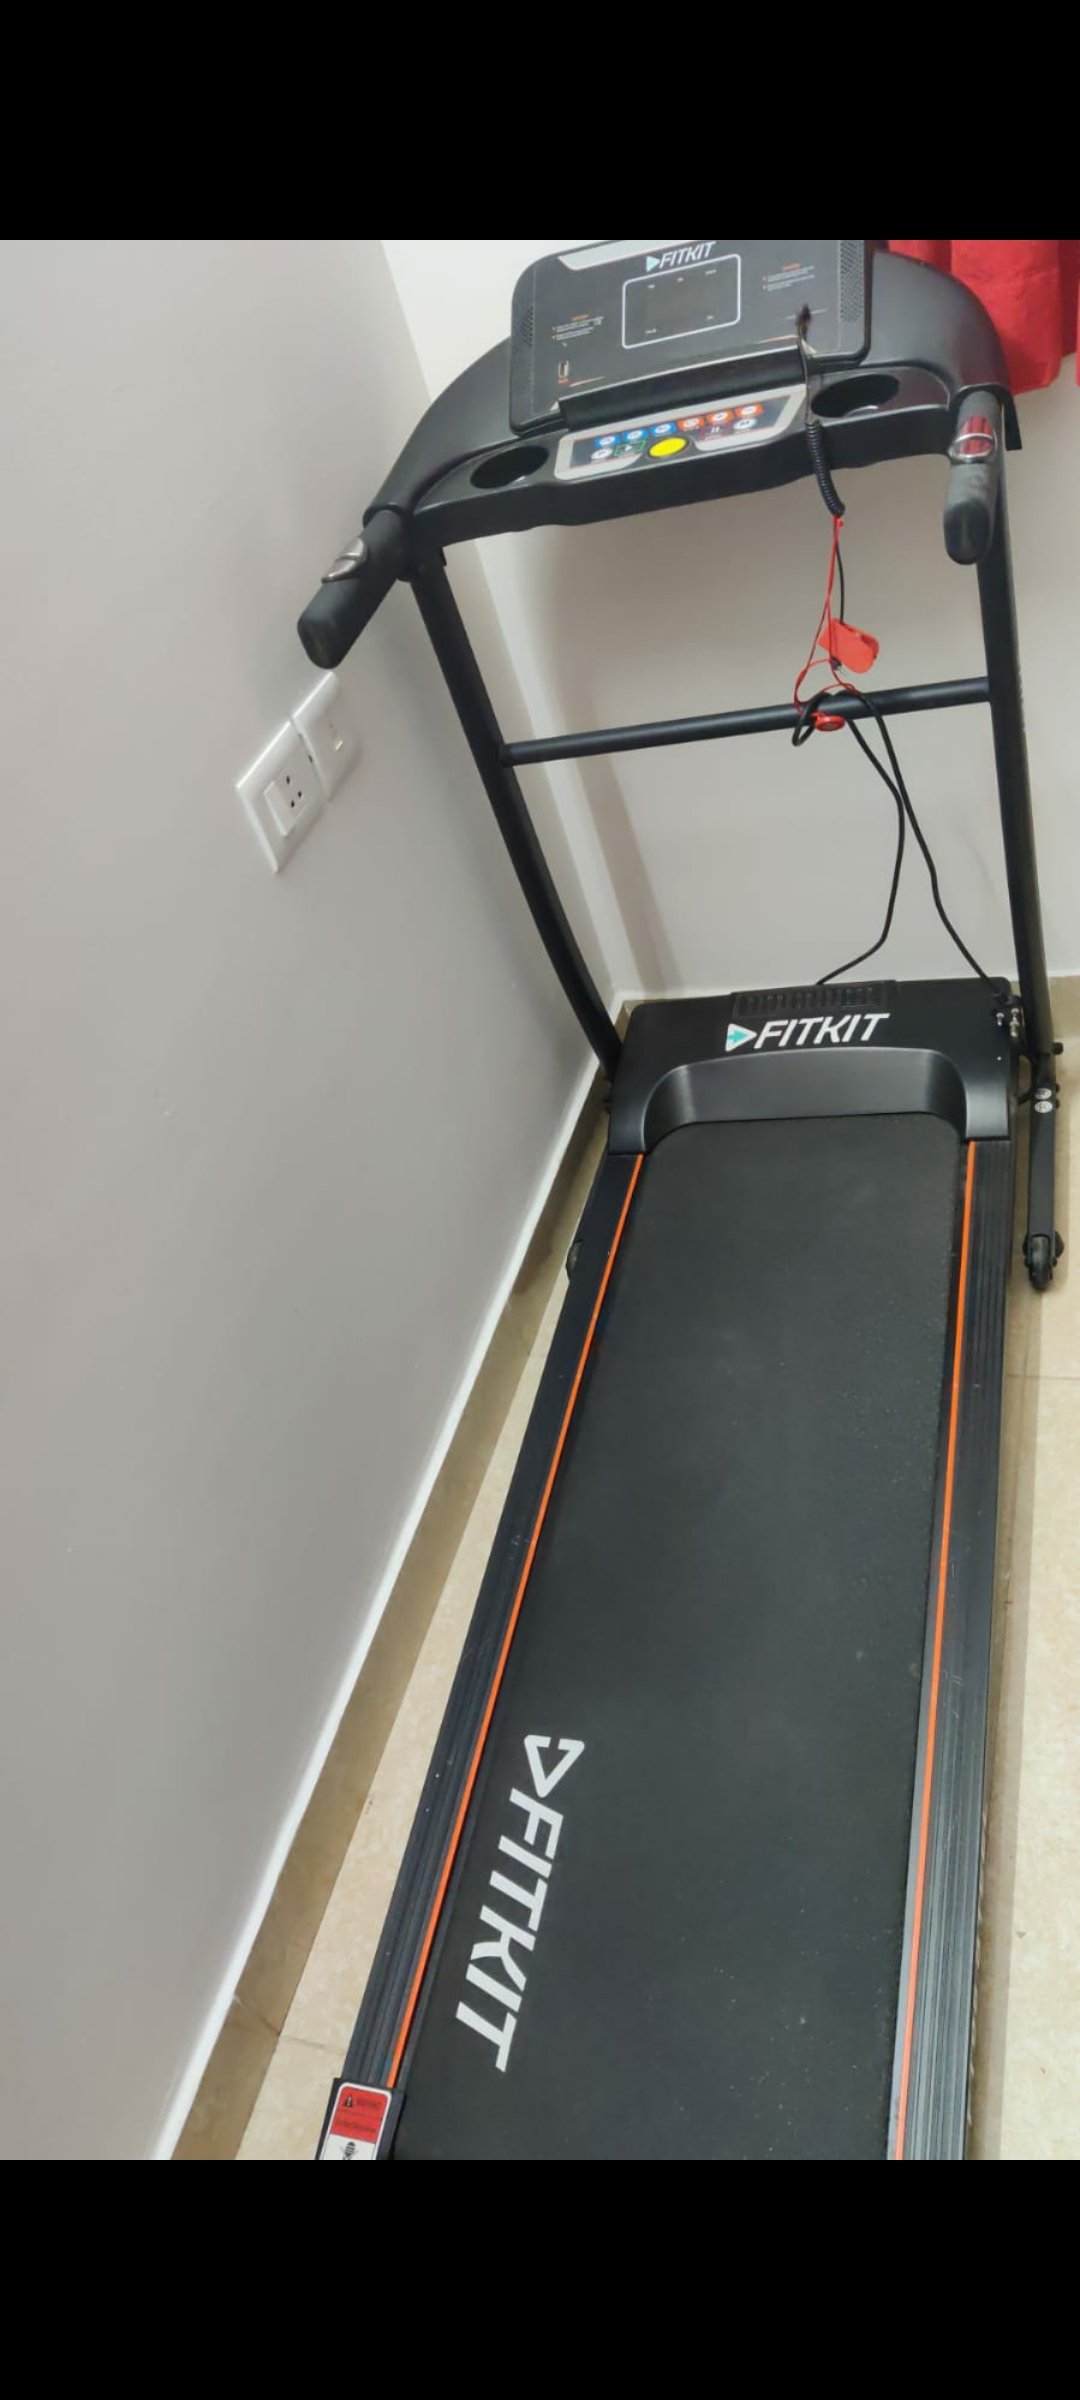 Rarely Used Fitkit Motorized Treadmill for sale..